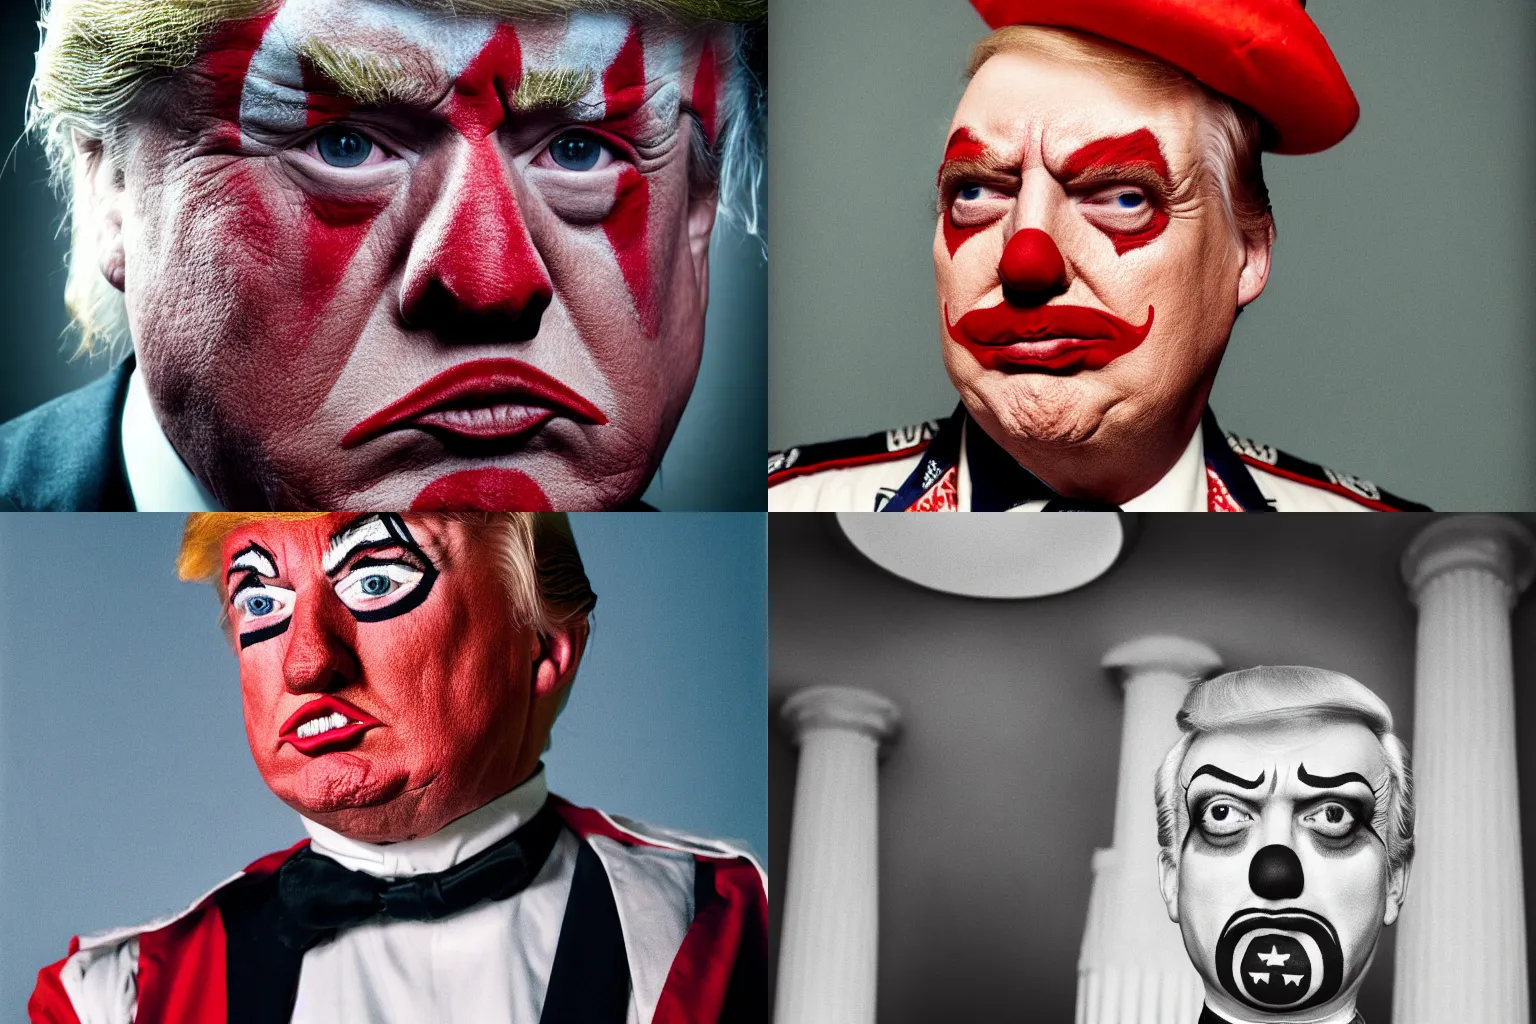 Prompt: portrait photograph of Donald Trump in clown makeup and wearing Schutzstaffel outfit, off-camera flash, canon 50mm lens f4 aperture, shallow depth of field, 1/400 shutterspeed, Ektachrome color photograph, single point of light, roman column background